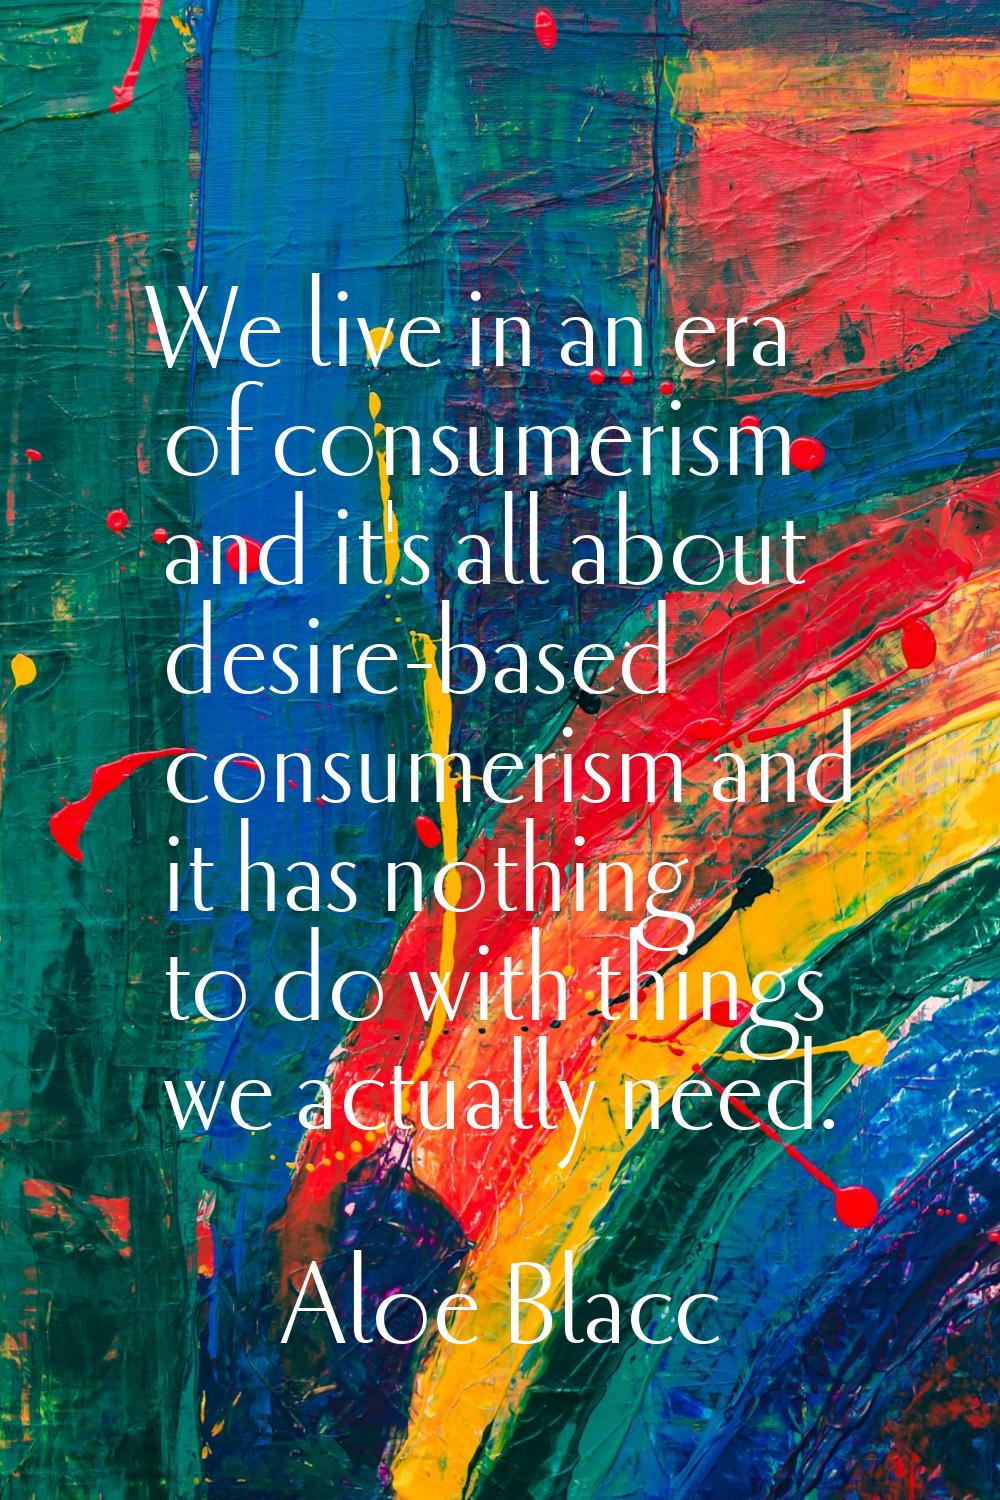 We live in an era of consumerism and it's all about desire-based consumerism and it has nothing to 